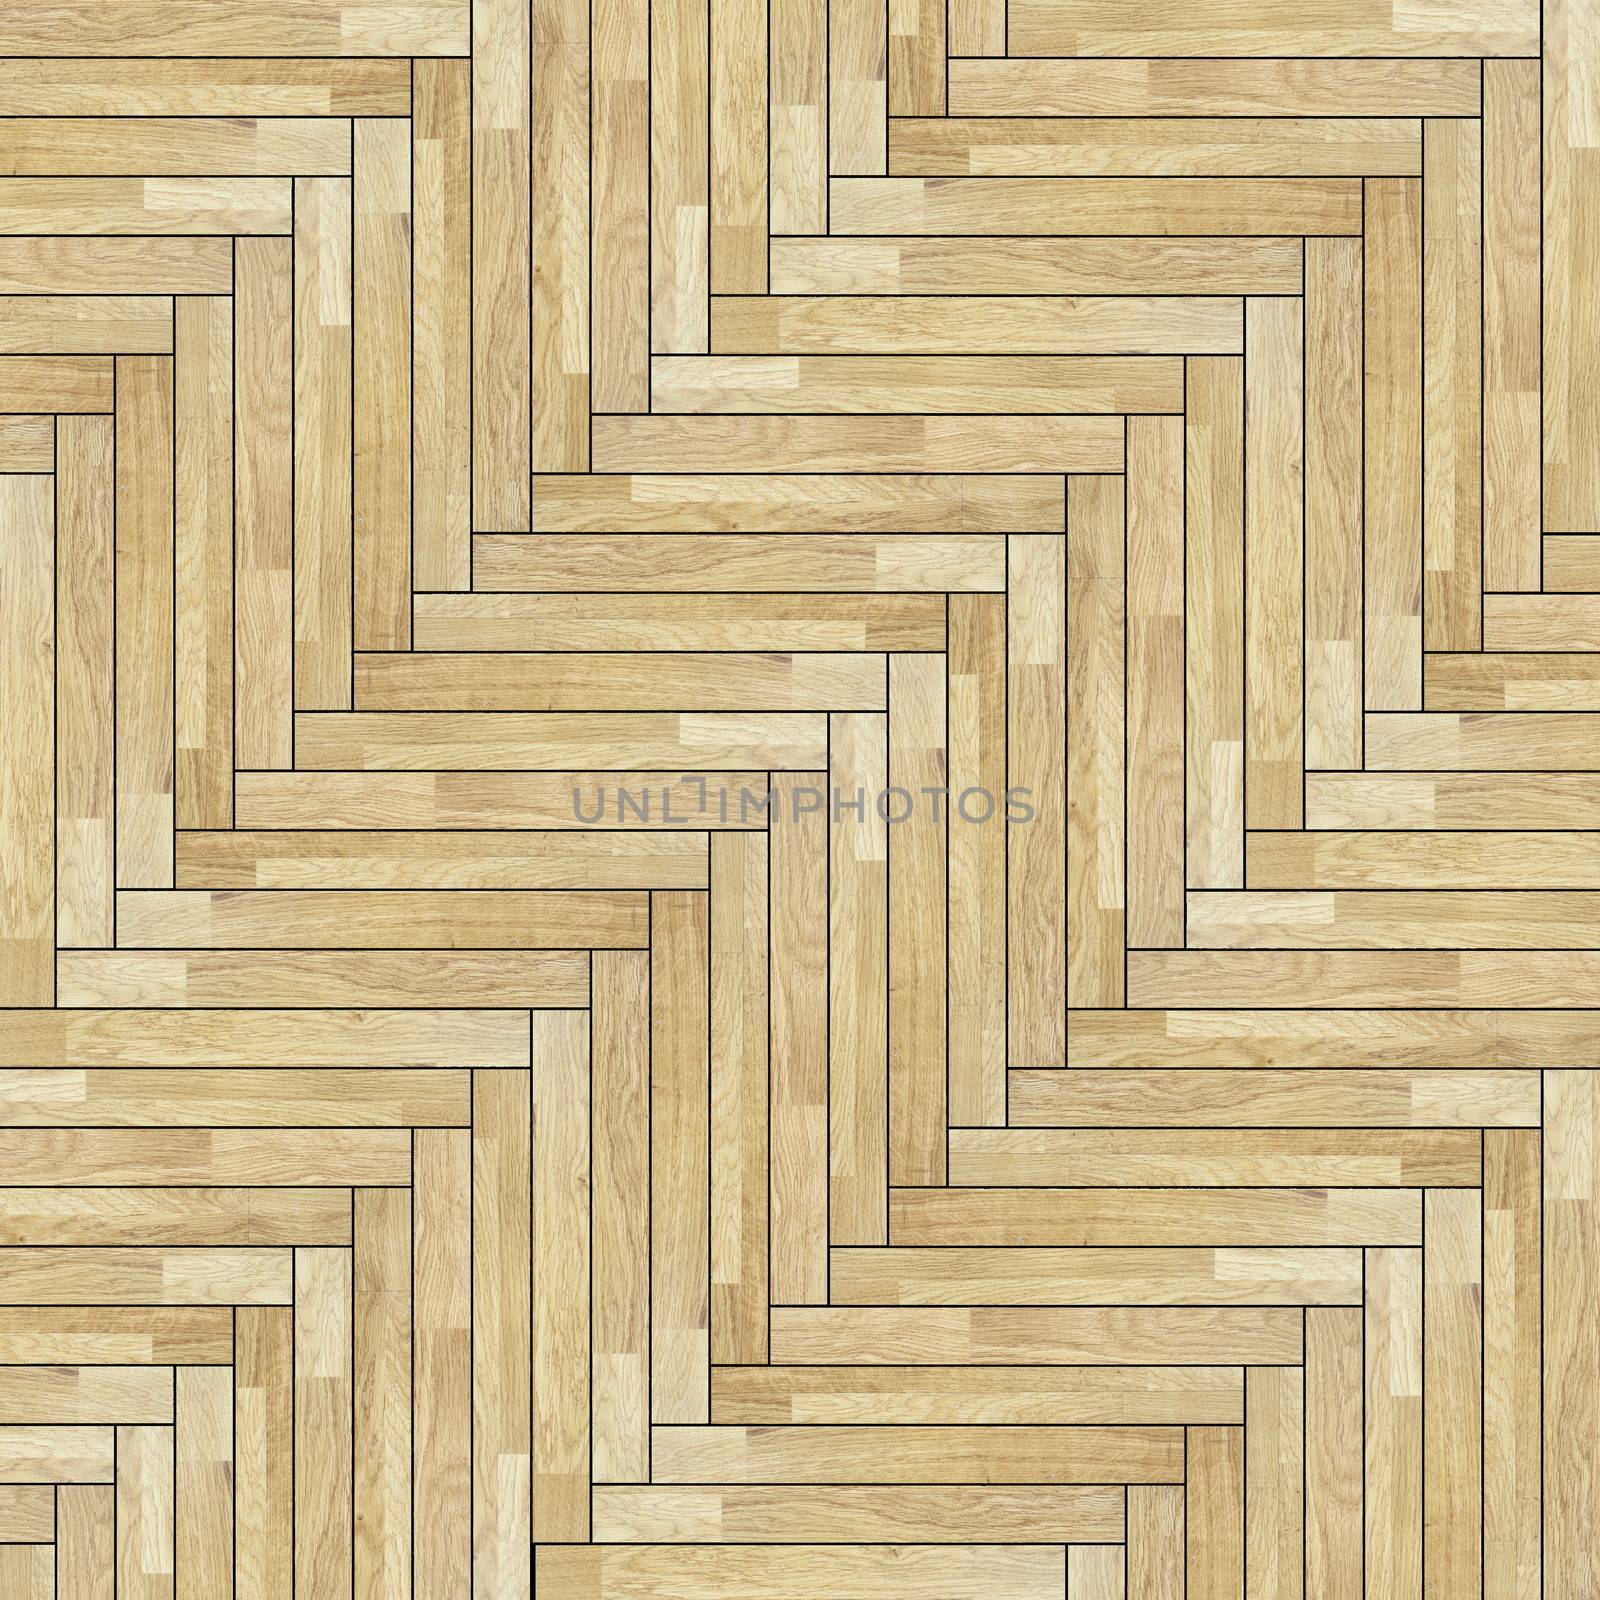 design of parquet pattern made from wooden  tiles mounted at an angle